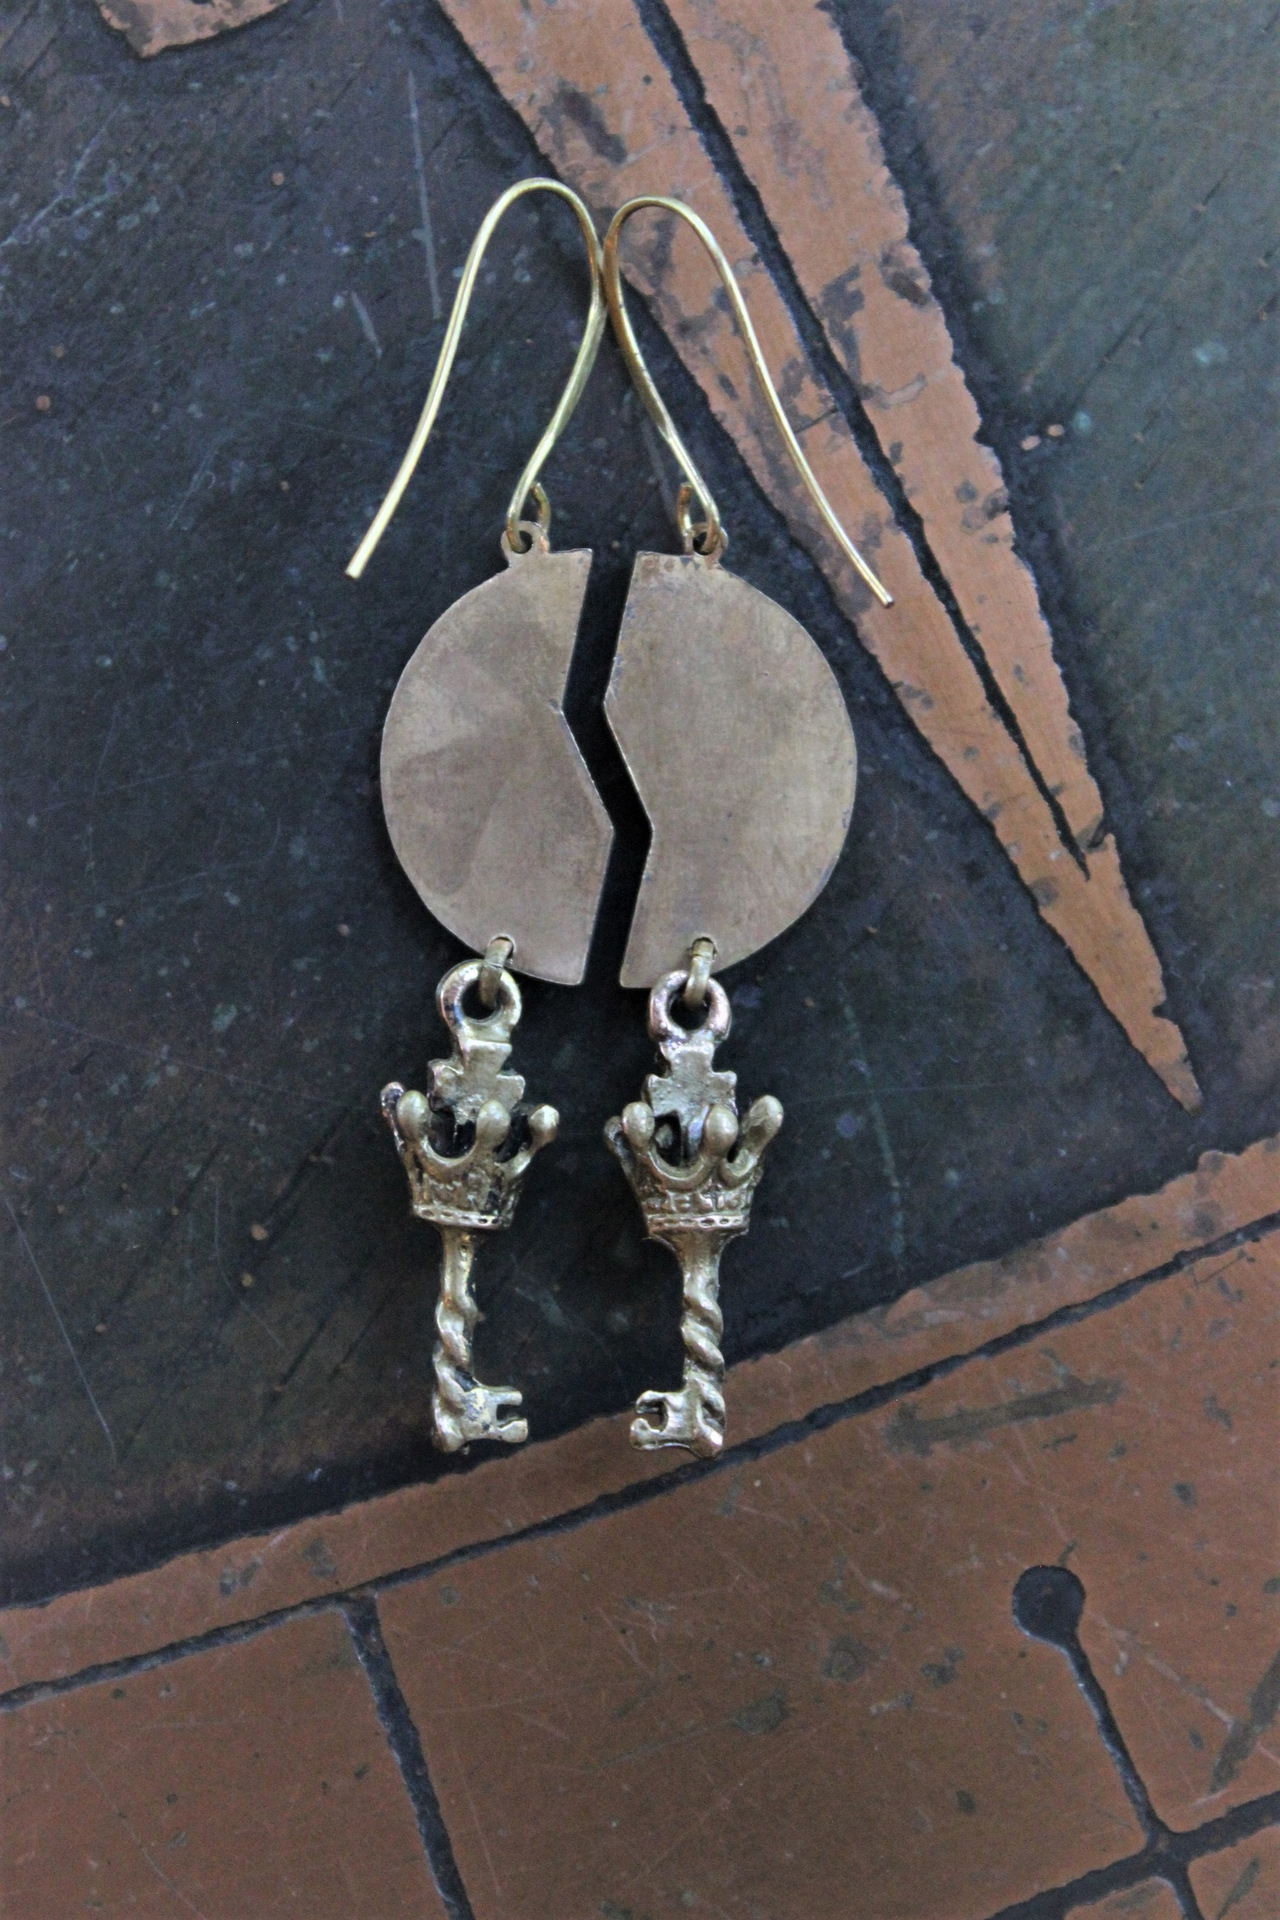 Between Me and Thee Earrings with Engraved Mizpah Coin Halves, Antique Cross and Crown Key Findings